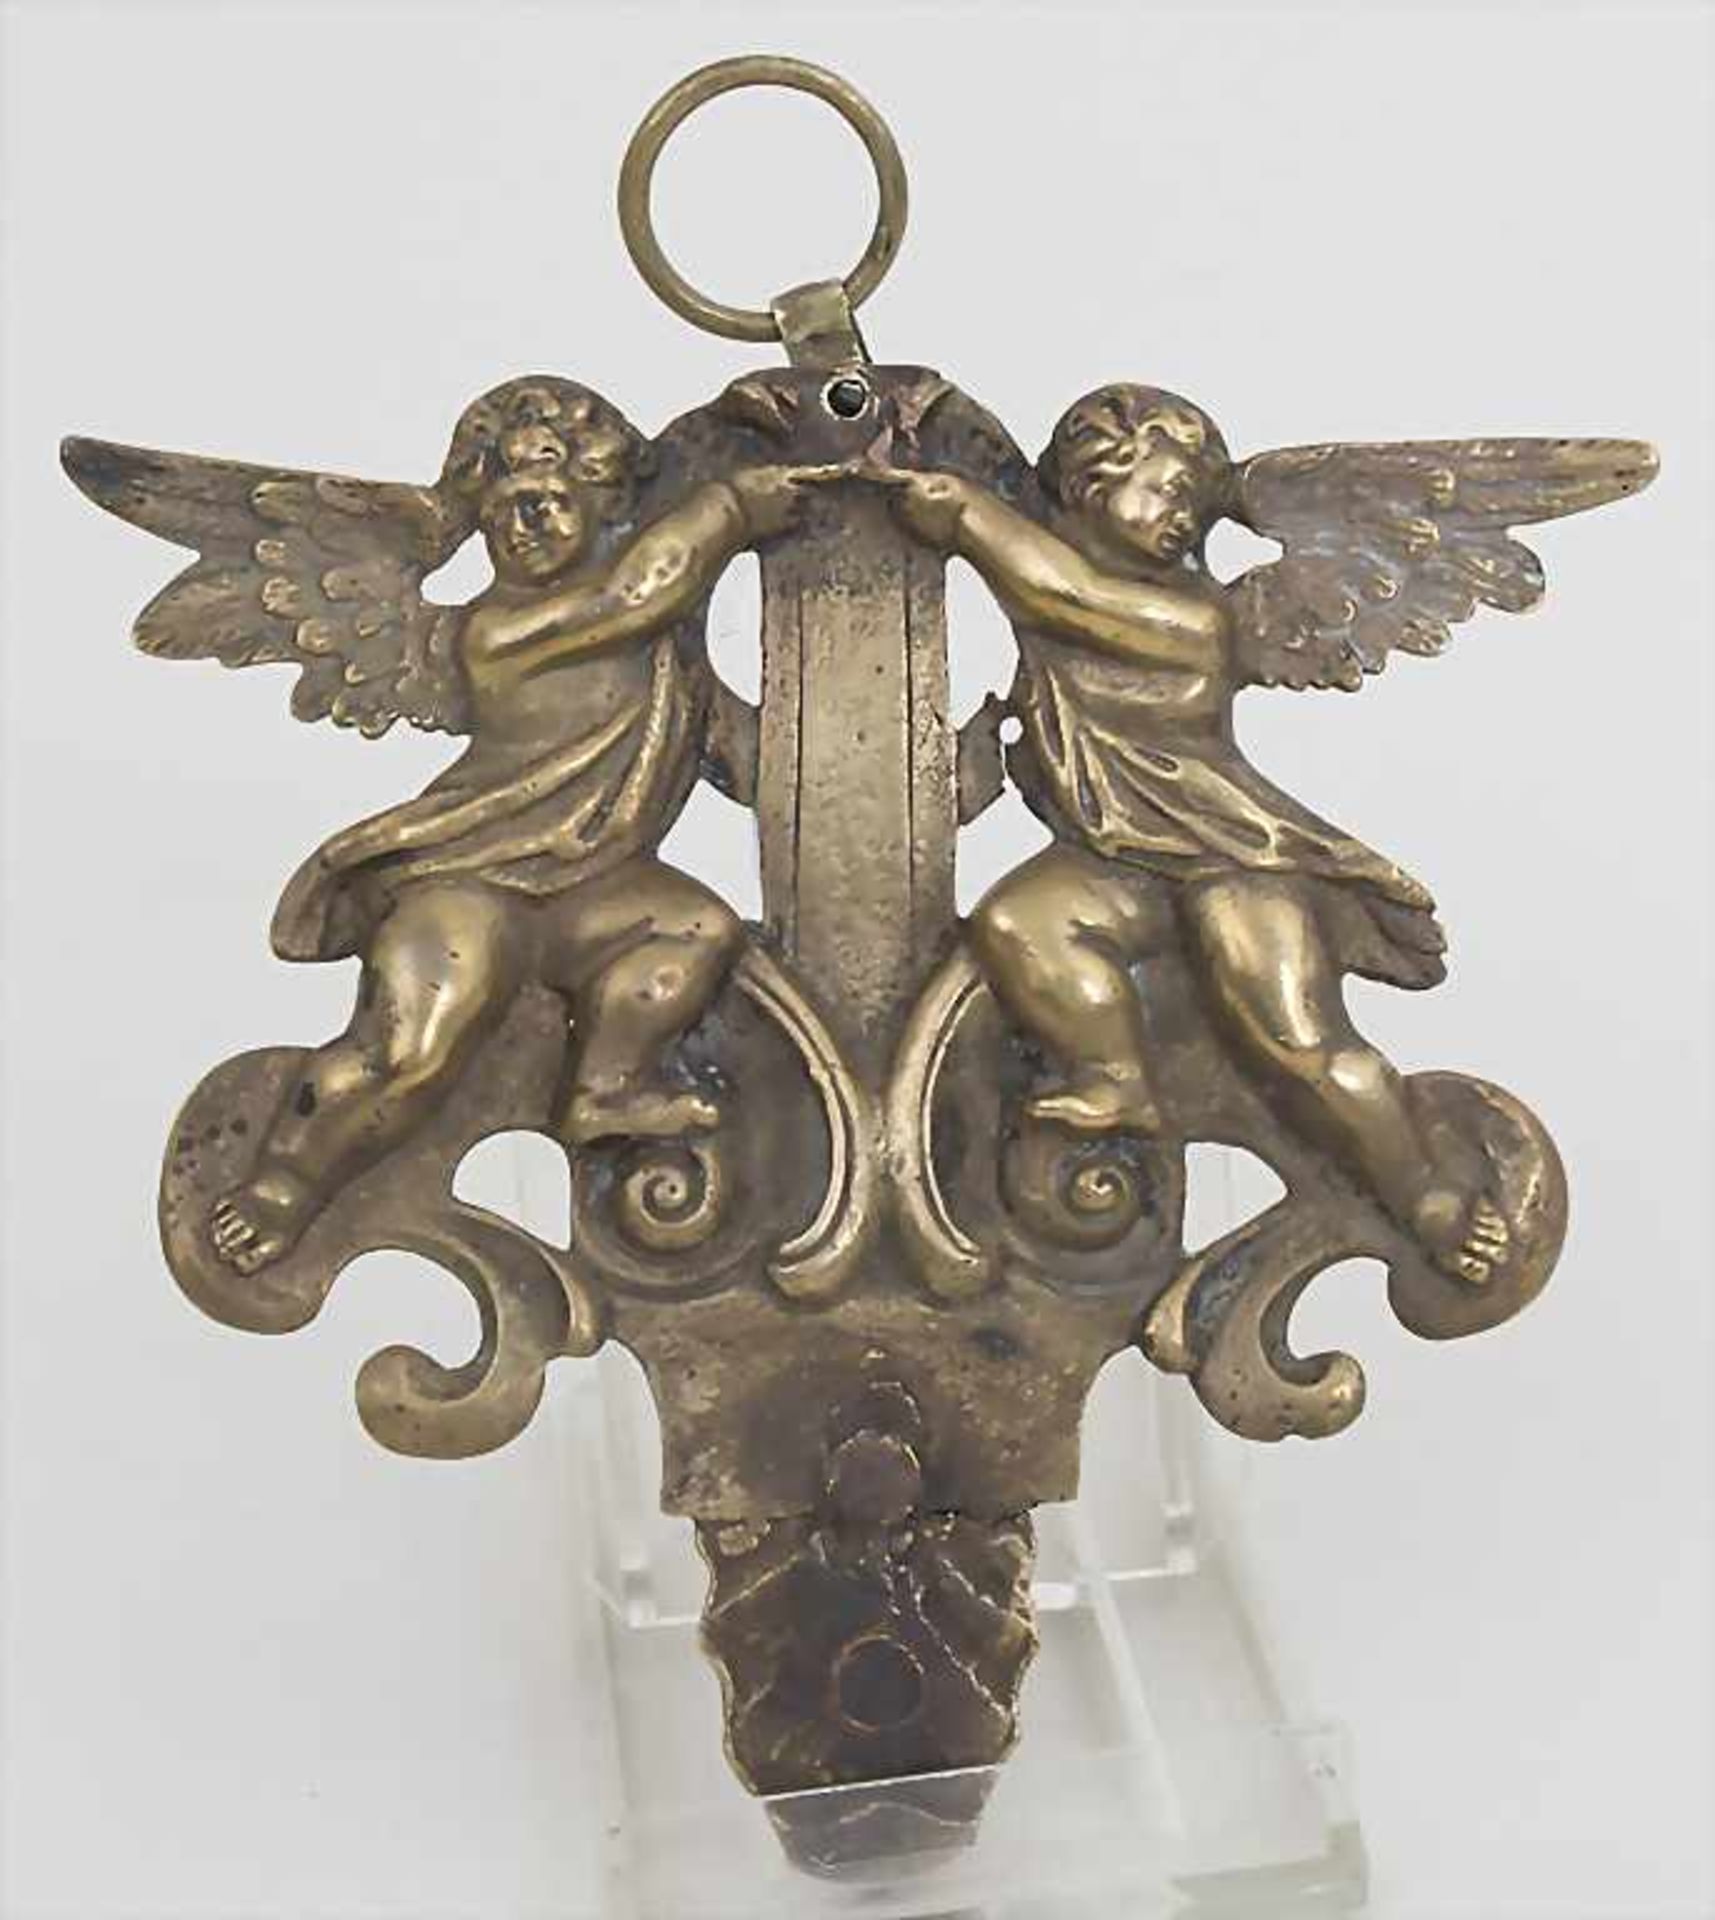 Wand-Applique mit Barock-Engeln / A wall plaque with a pair of baroque angel, 18. Jh.M